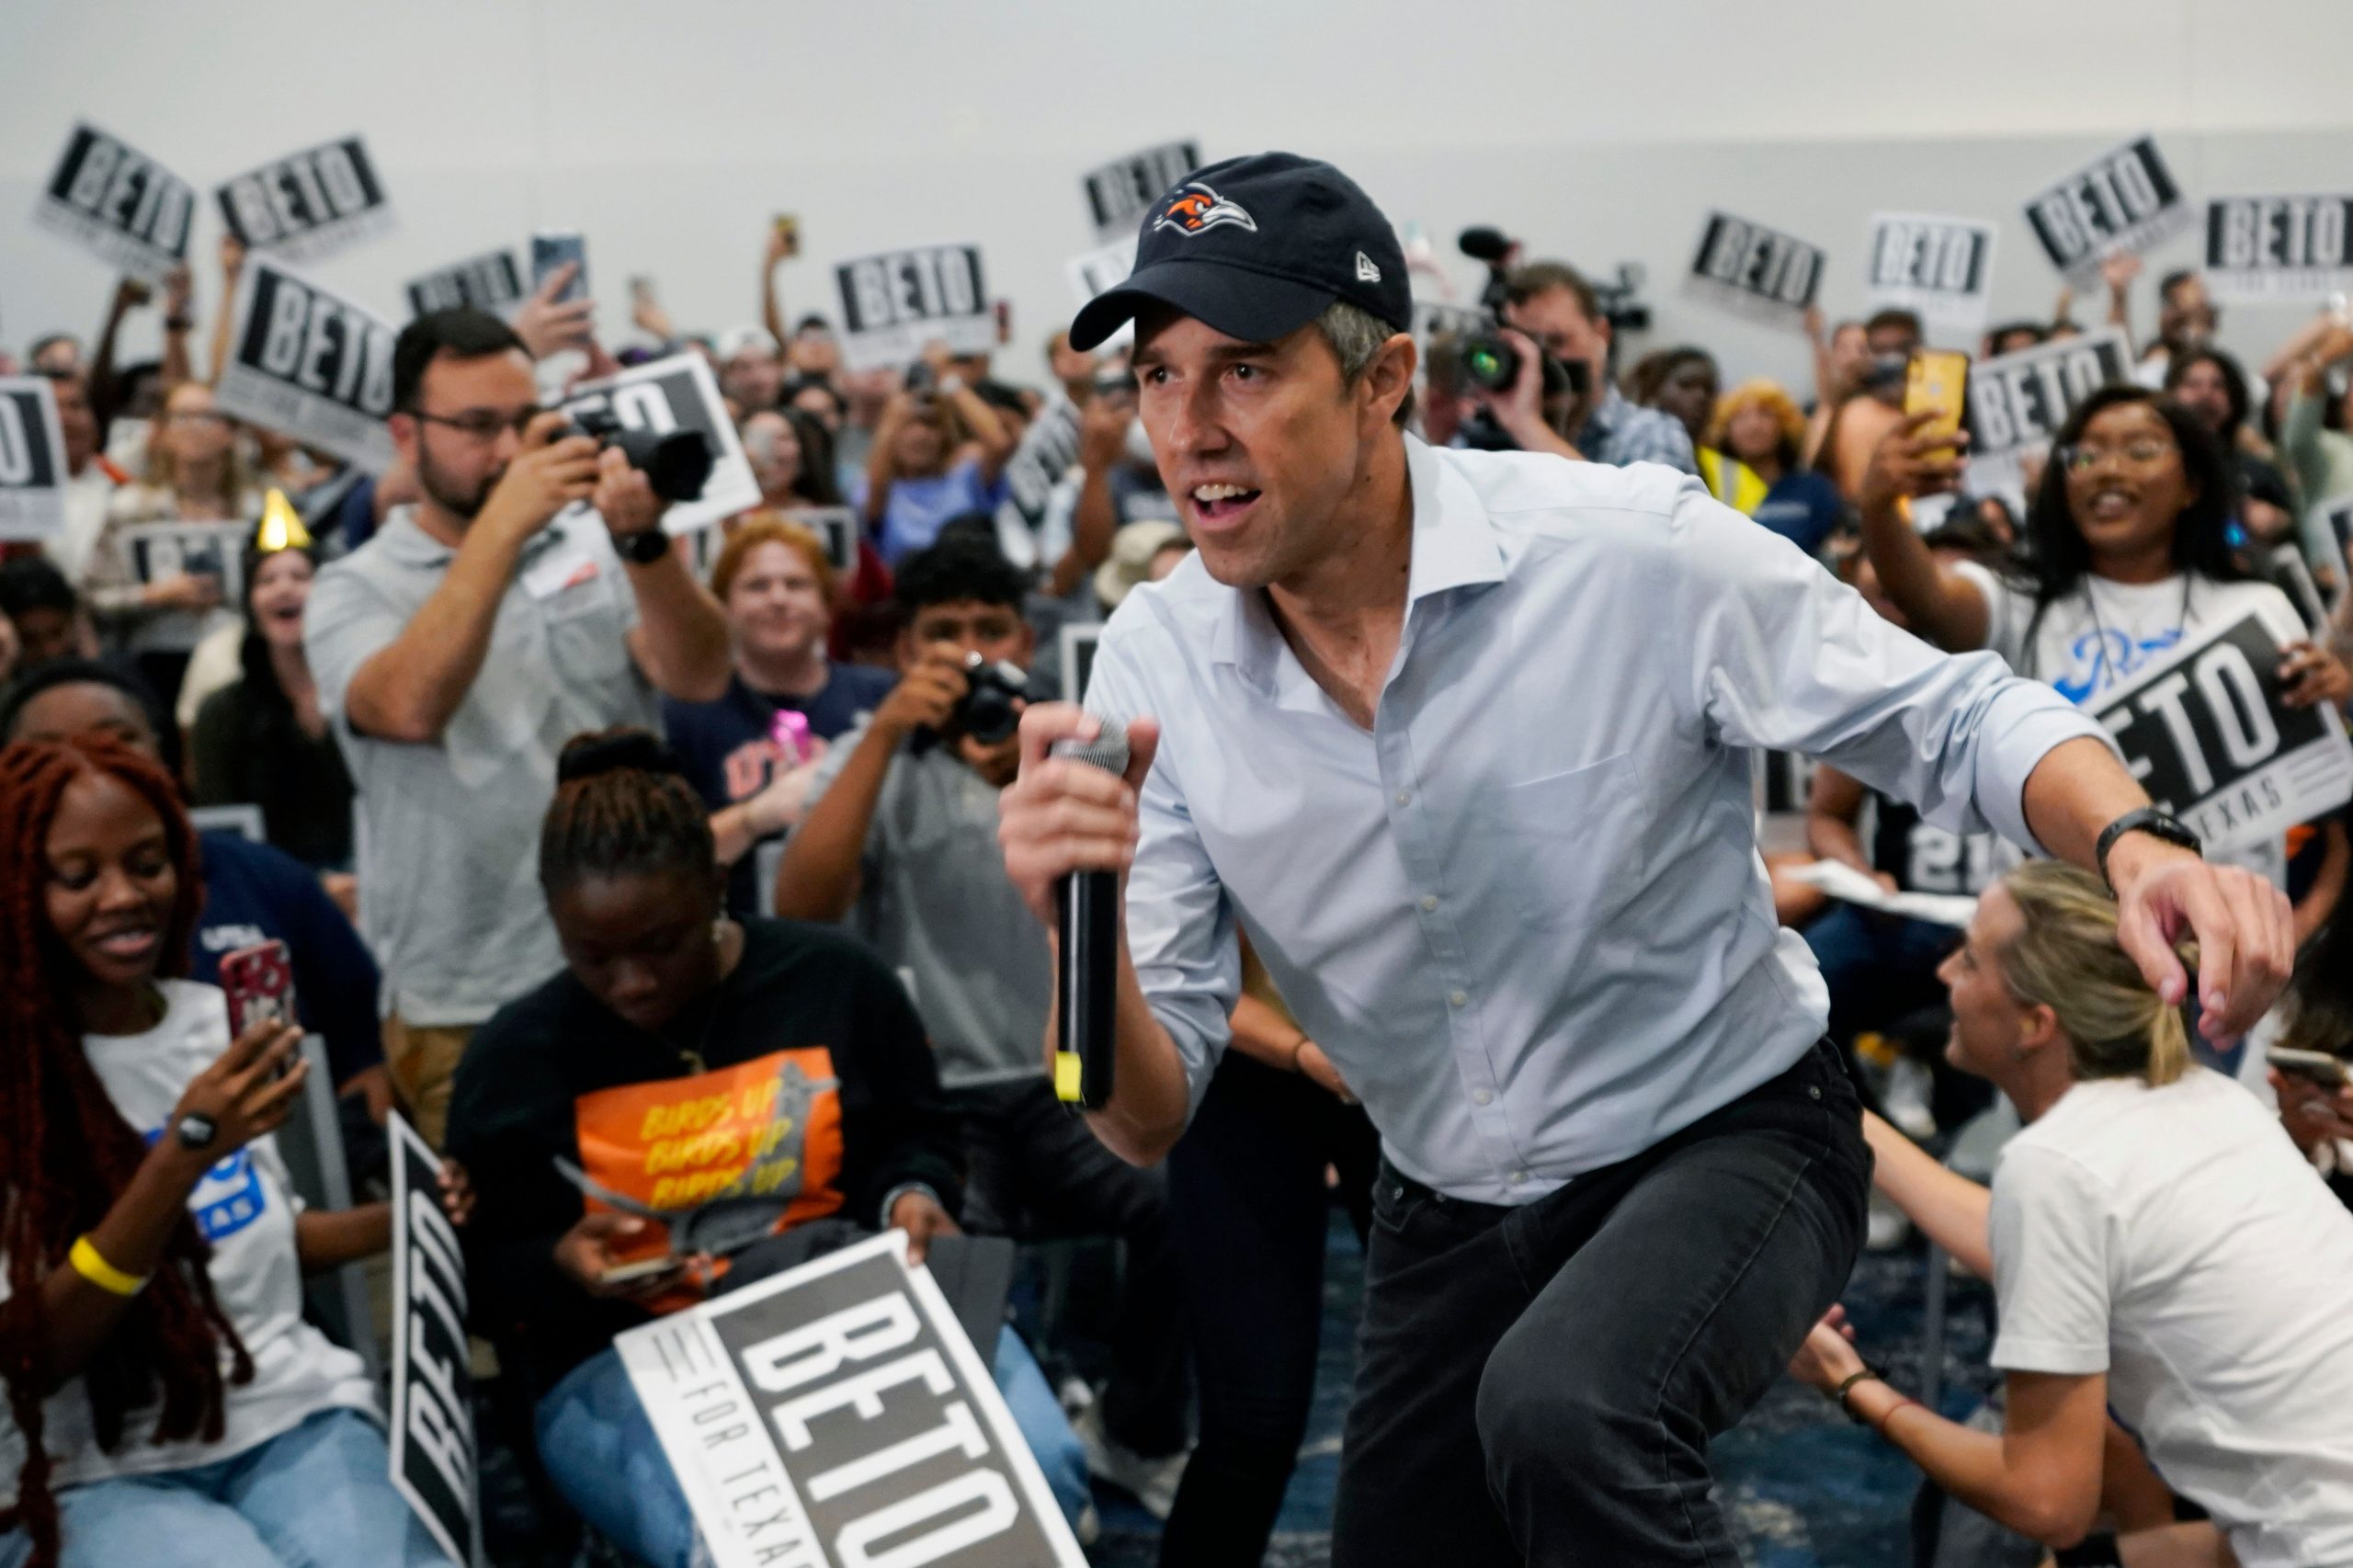 O’Rourke slams Abbott’s ‘could have been worse’ response to Uvalde shooting